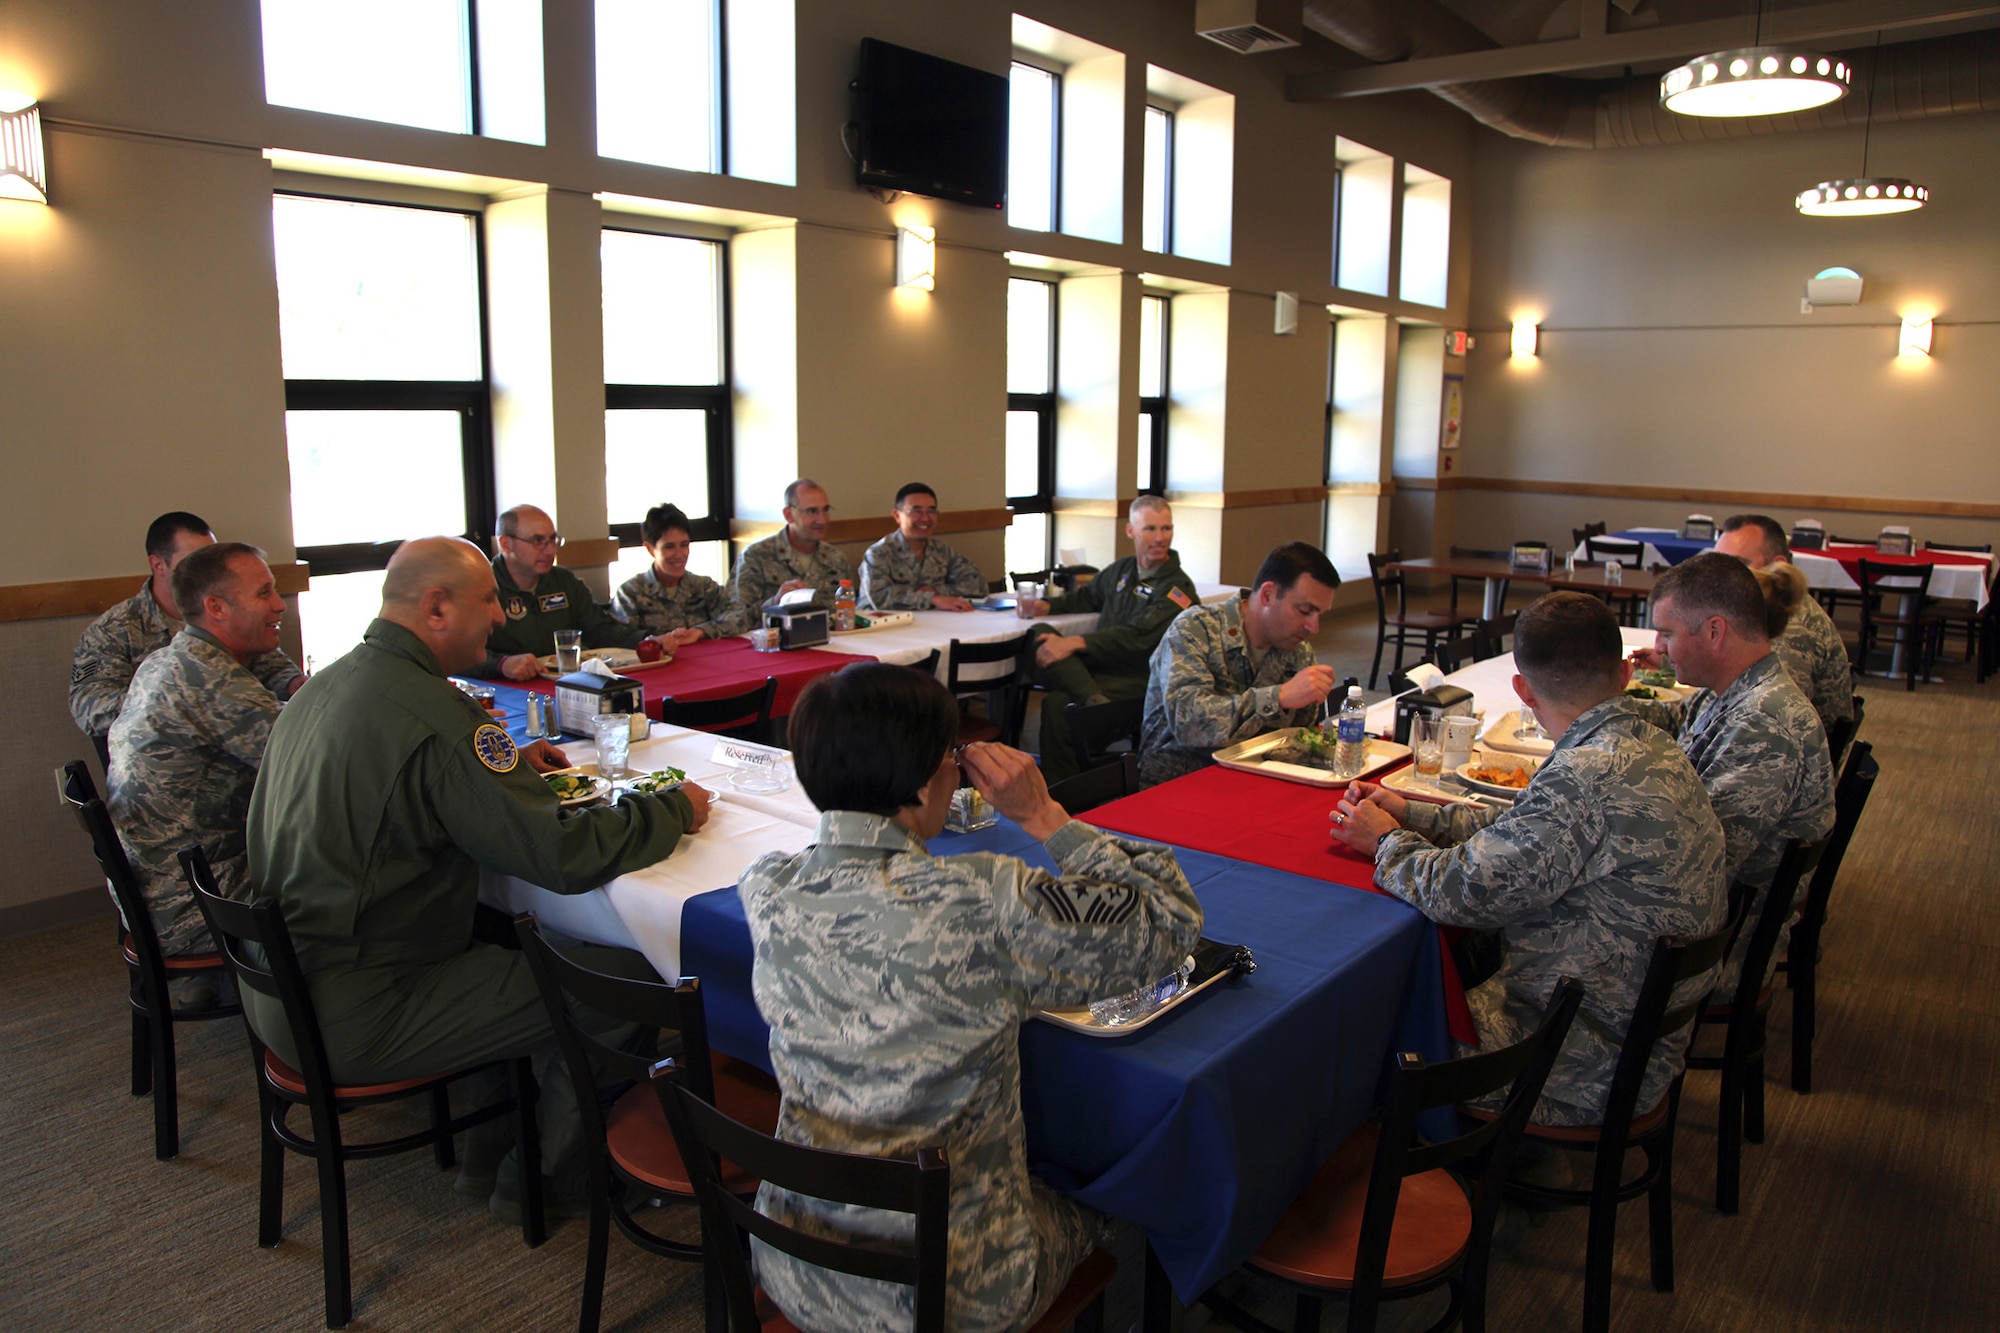 TRAVIS AIR FORCE BASE, Calif. --Maj. Gen. Richard S. "Beef" Haddad, Vice Commander of the Air Force Reserve Command, has lunch with 349th Air Mobility Wing squadron commanders in the Sierra Inn DFAC,  Travis Air Force Base, Calif., June 21, 2014.  The general will be visiting facilities and meeting with Airman to see air mobility innovations helping Travis AFB personnel deliver America's hope and might around the globe. (U.S. Air Force photo/Lt. Col. Robert Couse-Baker)